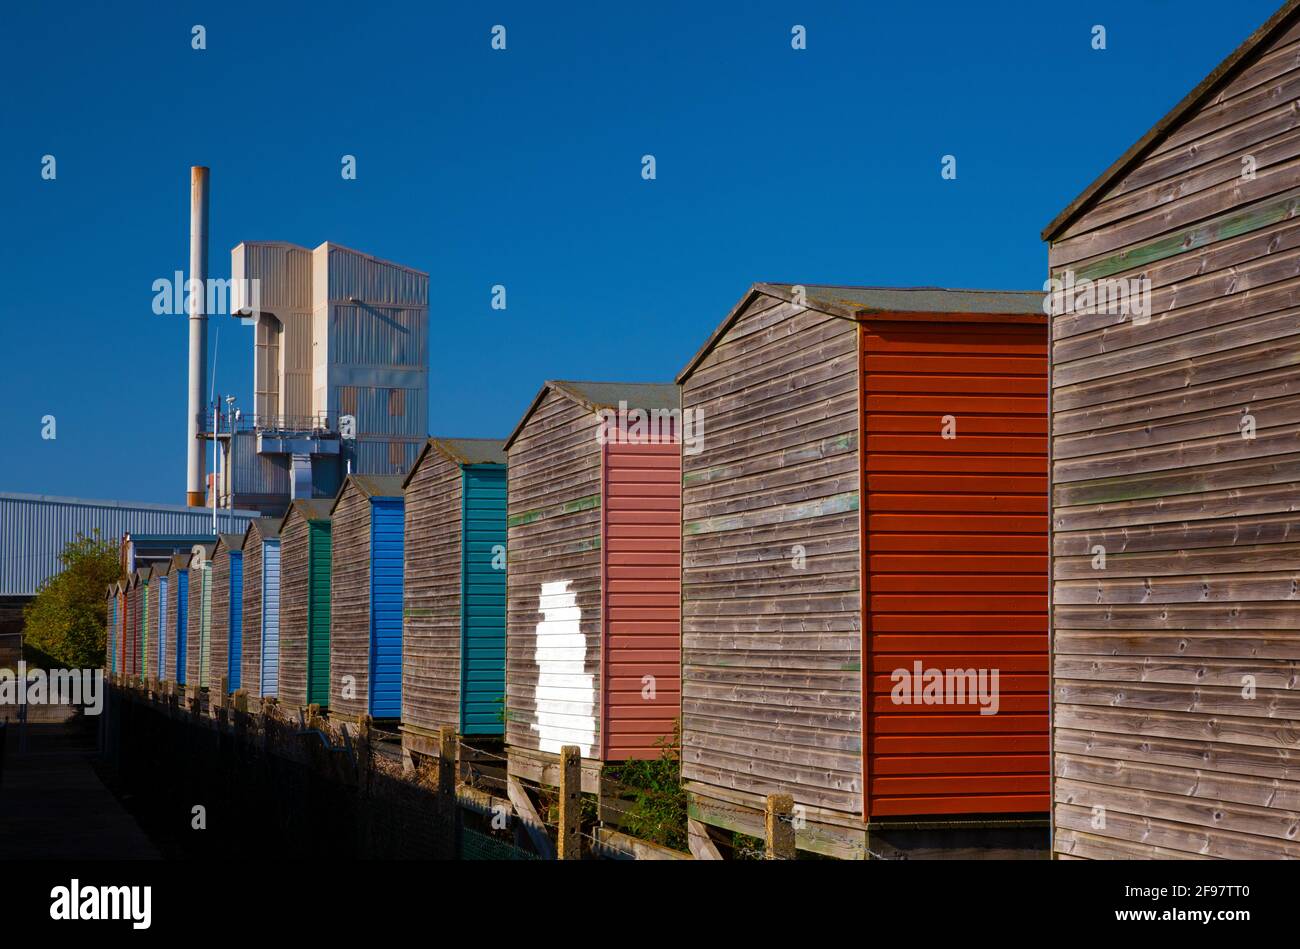 The Brett Aggregates factory overshadows traditional beach huts at Whitstable, Kent, UK. Stock Photo